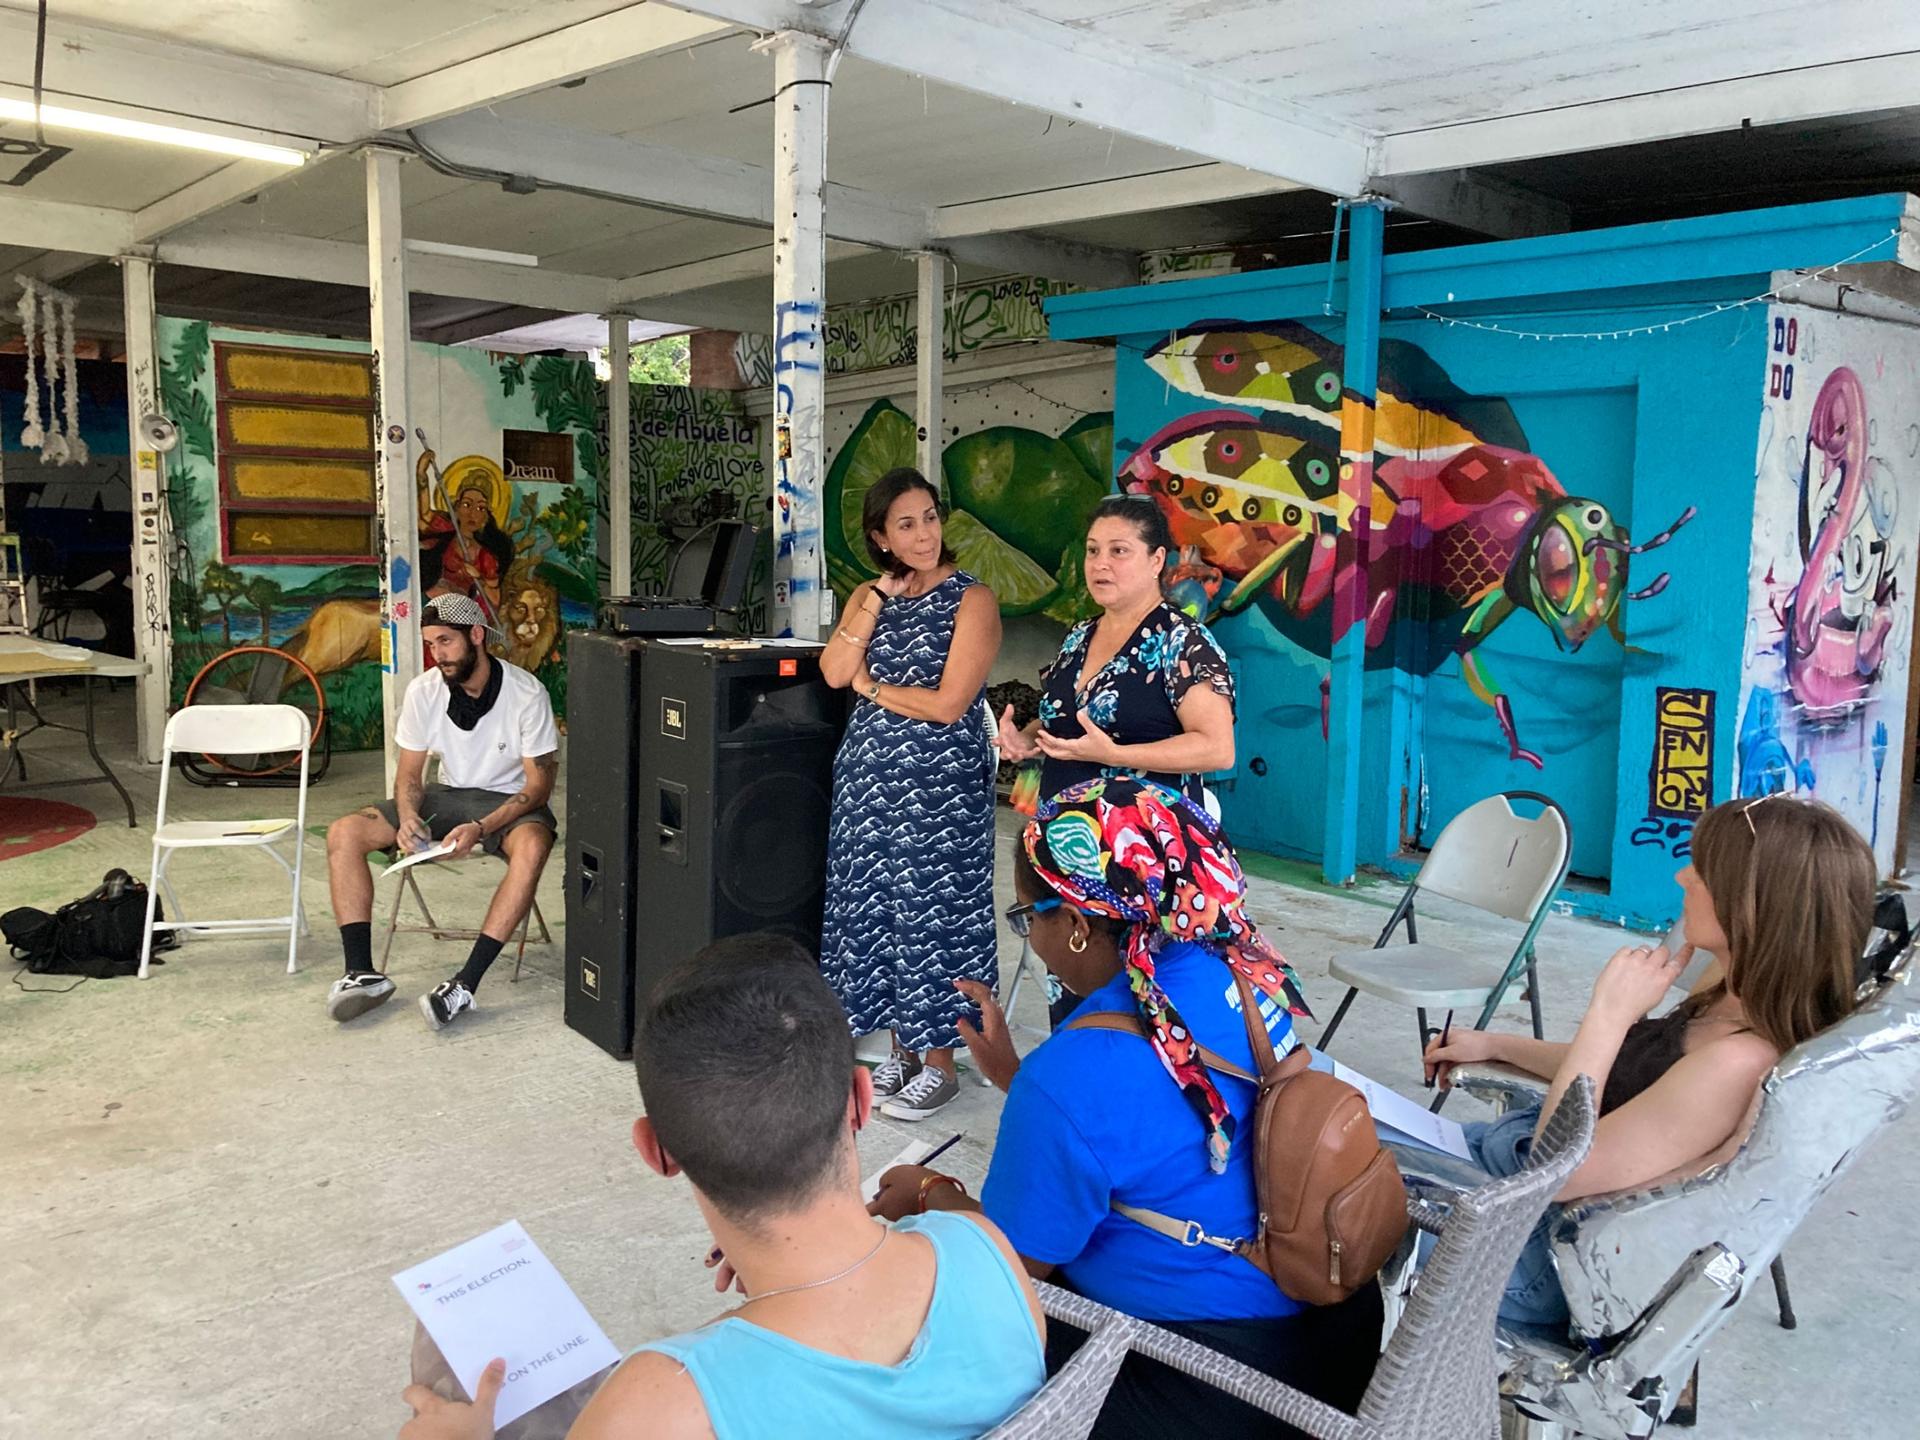 Ana Sofia Pelaez (in blue), founder of the Miami Freedom Project and Iris Ruiz (in black), Cuban artist and coordinator for the San Isidro movement lead an art workshop at La Esquina de Abuela, a cultural center in Miami. 